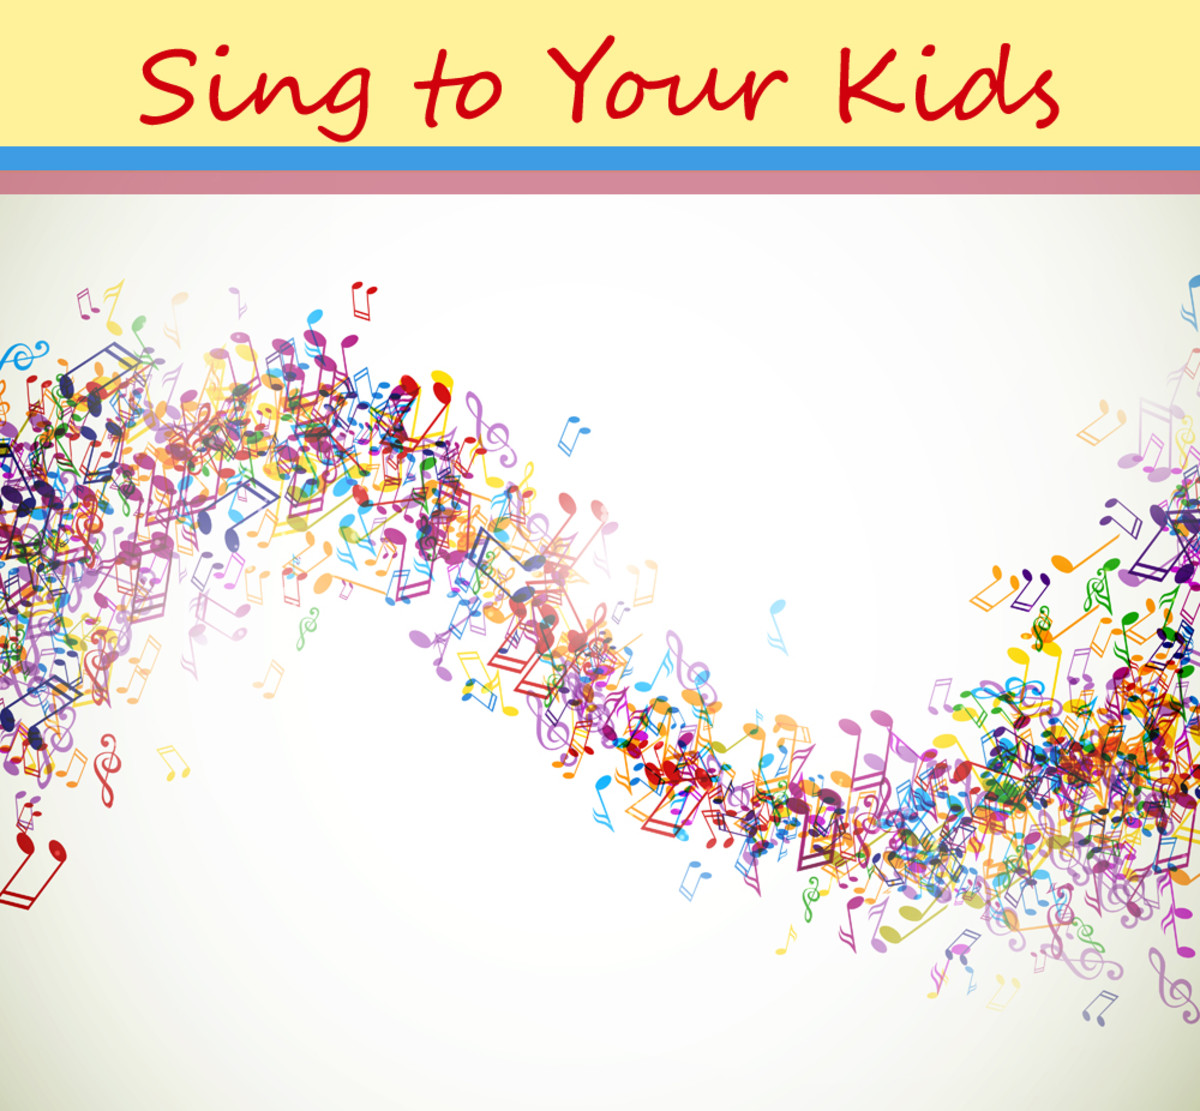 Sing to Your Kids to Help Them Learn